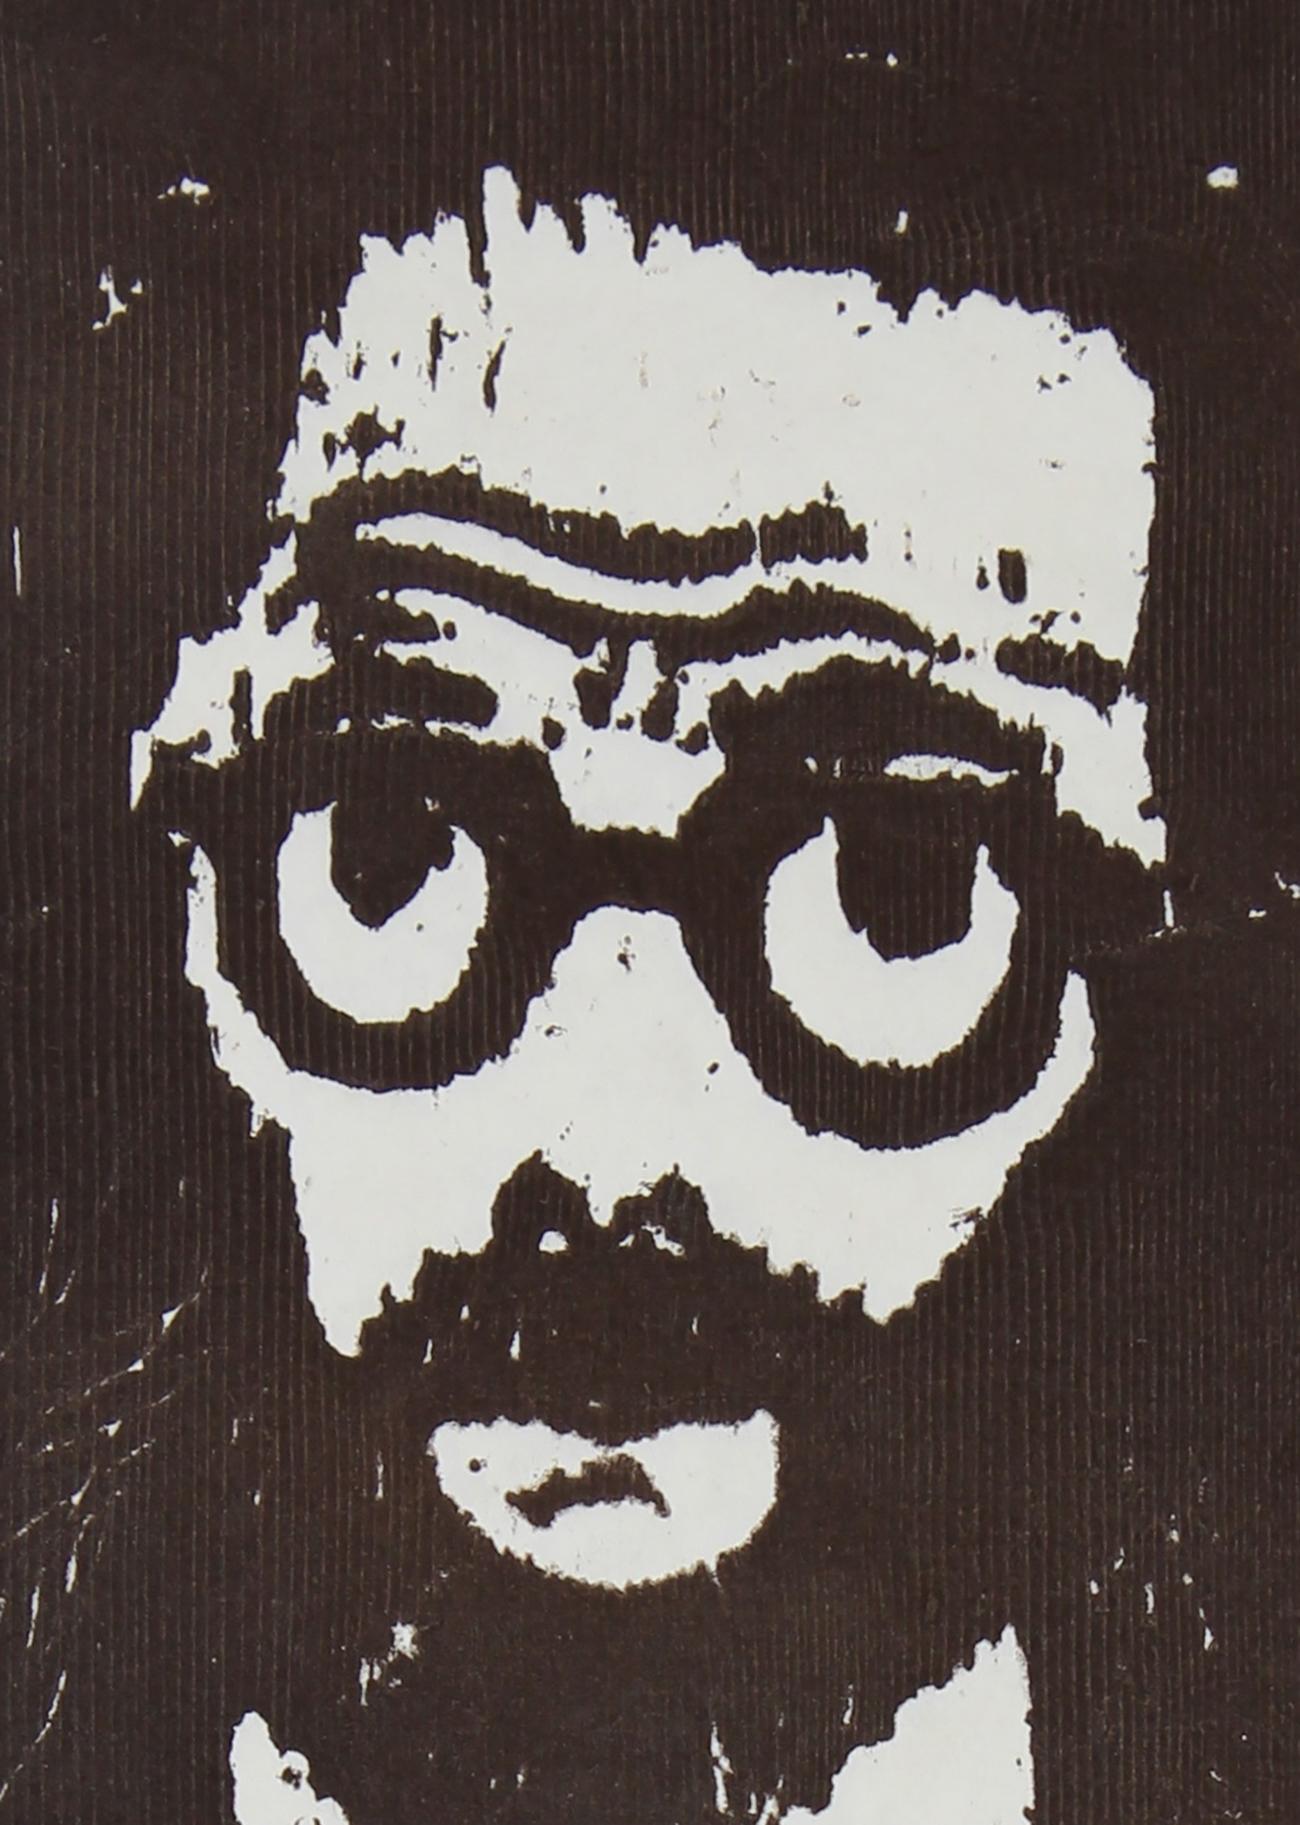 Woodcut Self-Portrait of The Artist with Glasses and Beard, Circa 1970s - Print by Rip Matteson